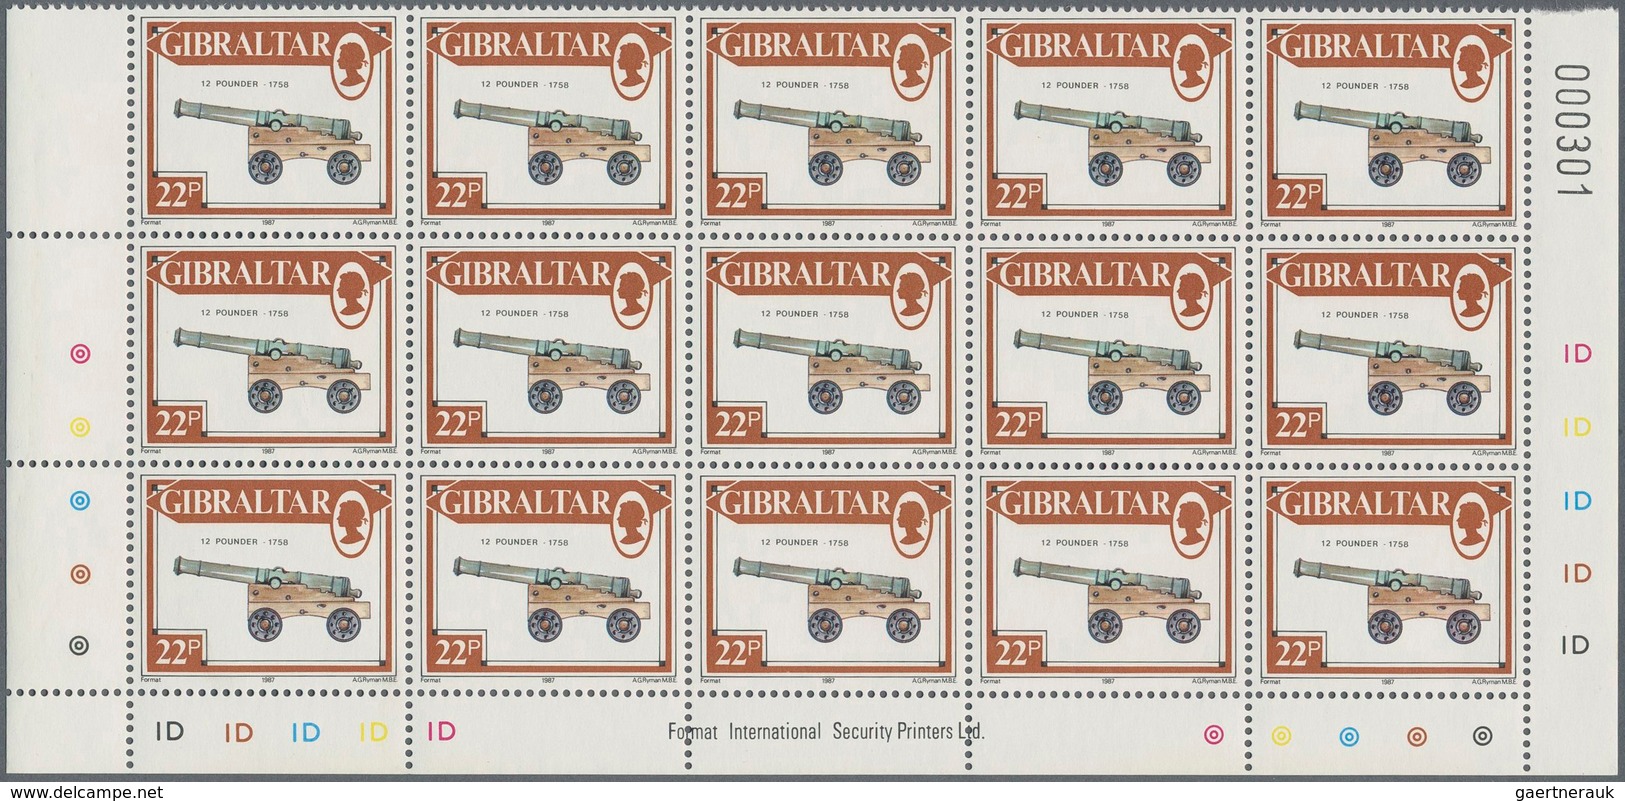 Gibraltar: 1987. Lot of 1,000 complete definitives set CANNONS (13 values). Mint, NH. (Michel 32,000